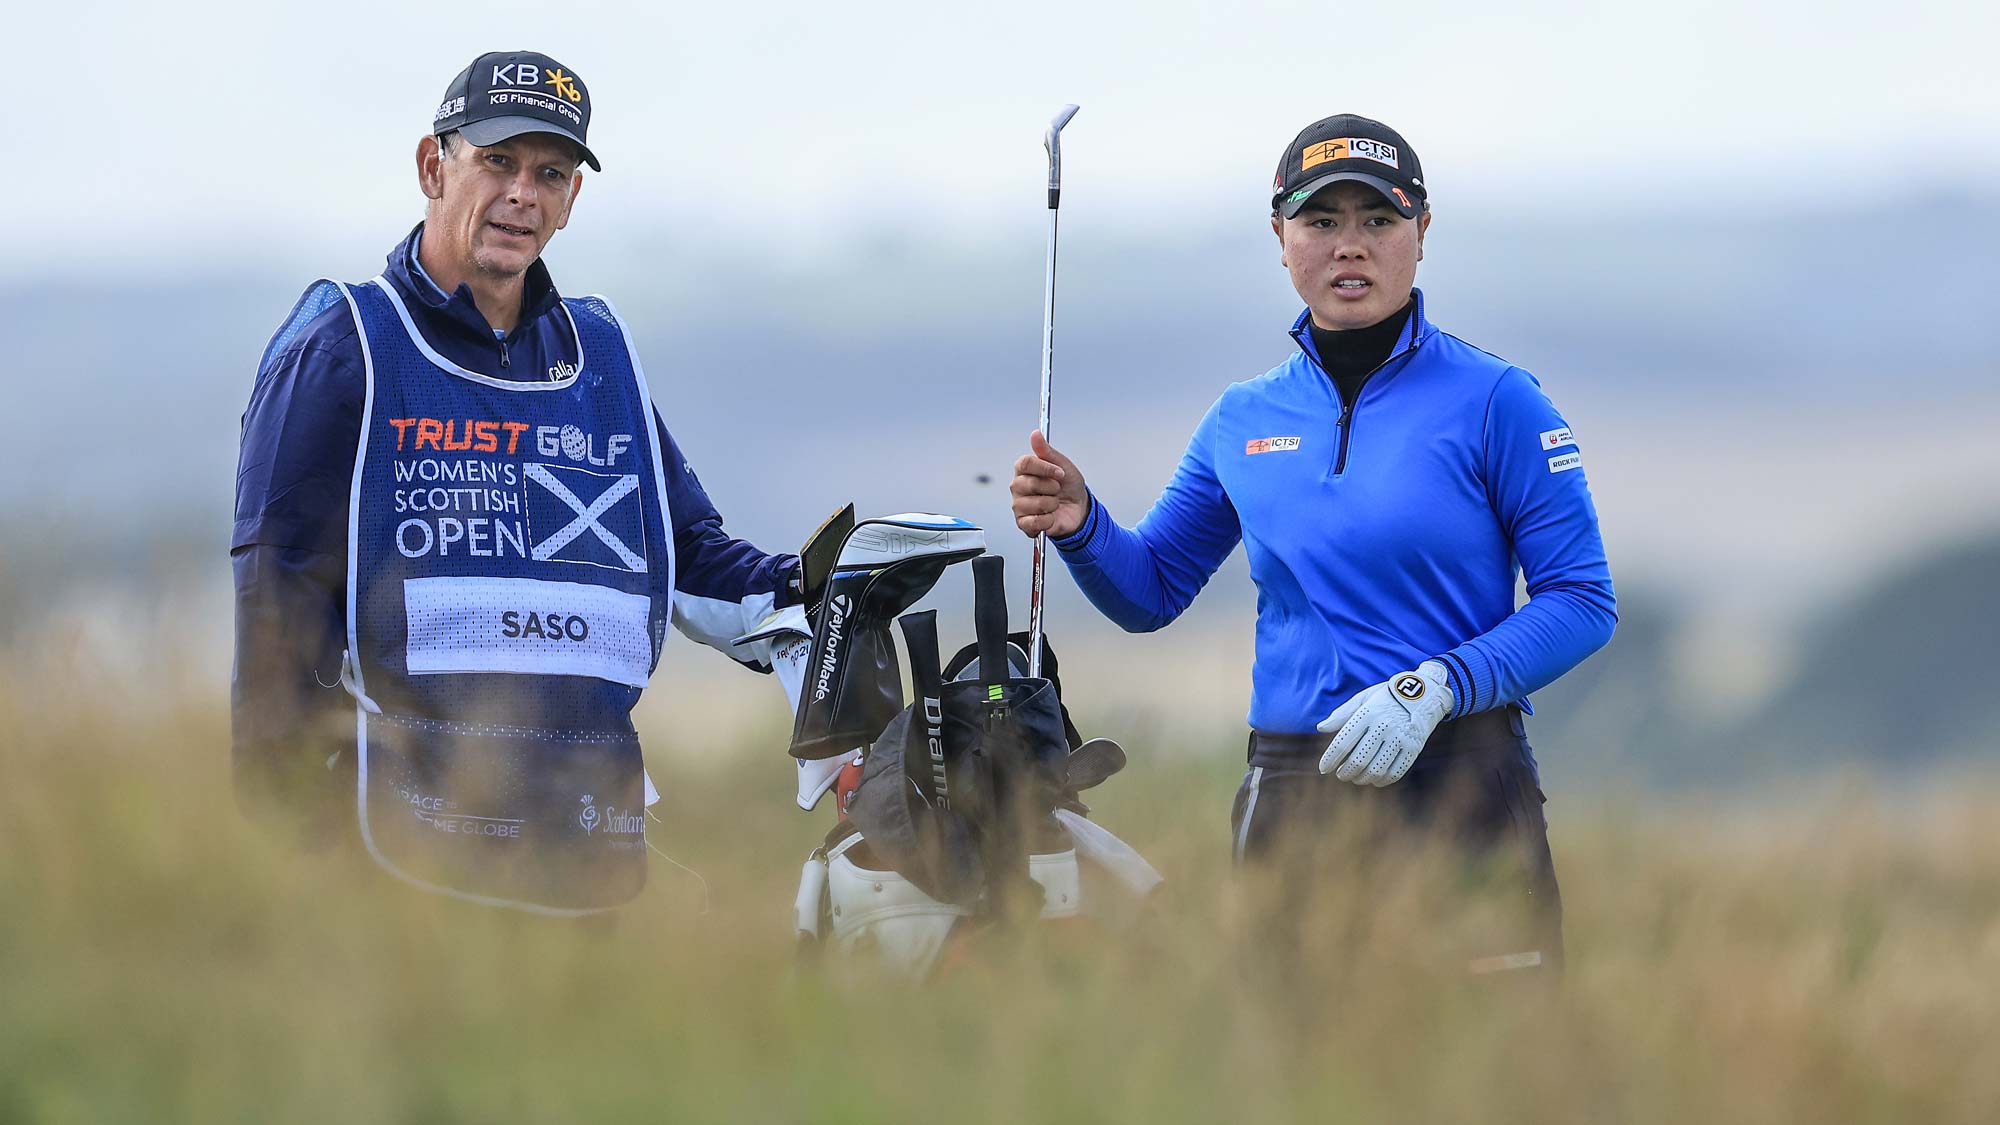 Yuka Saso of The Philippines plays her second shot on the 12th hole during the second round of the Trust Golf Scottish Women's Open